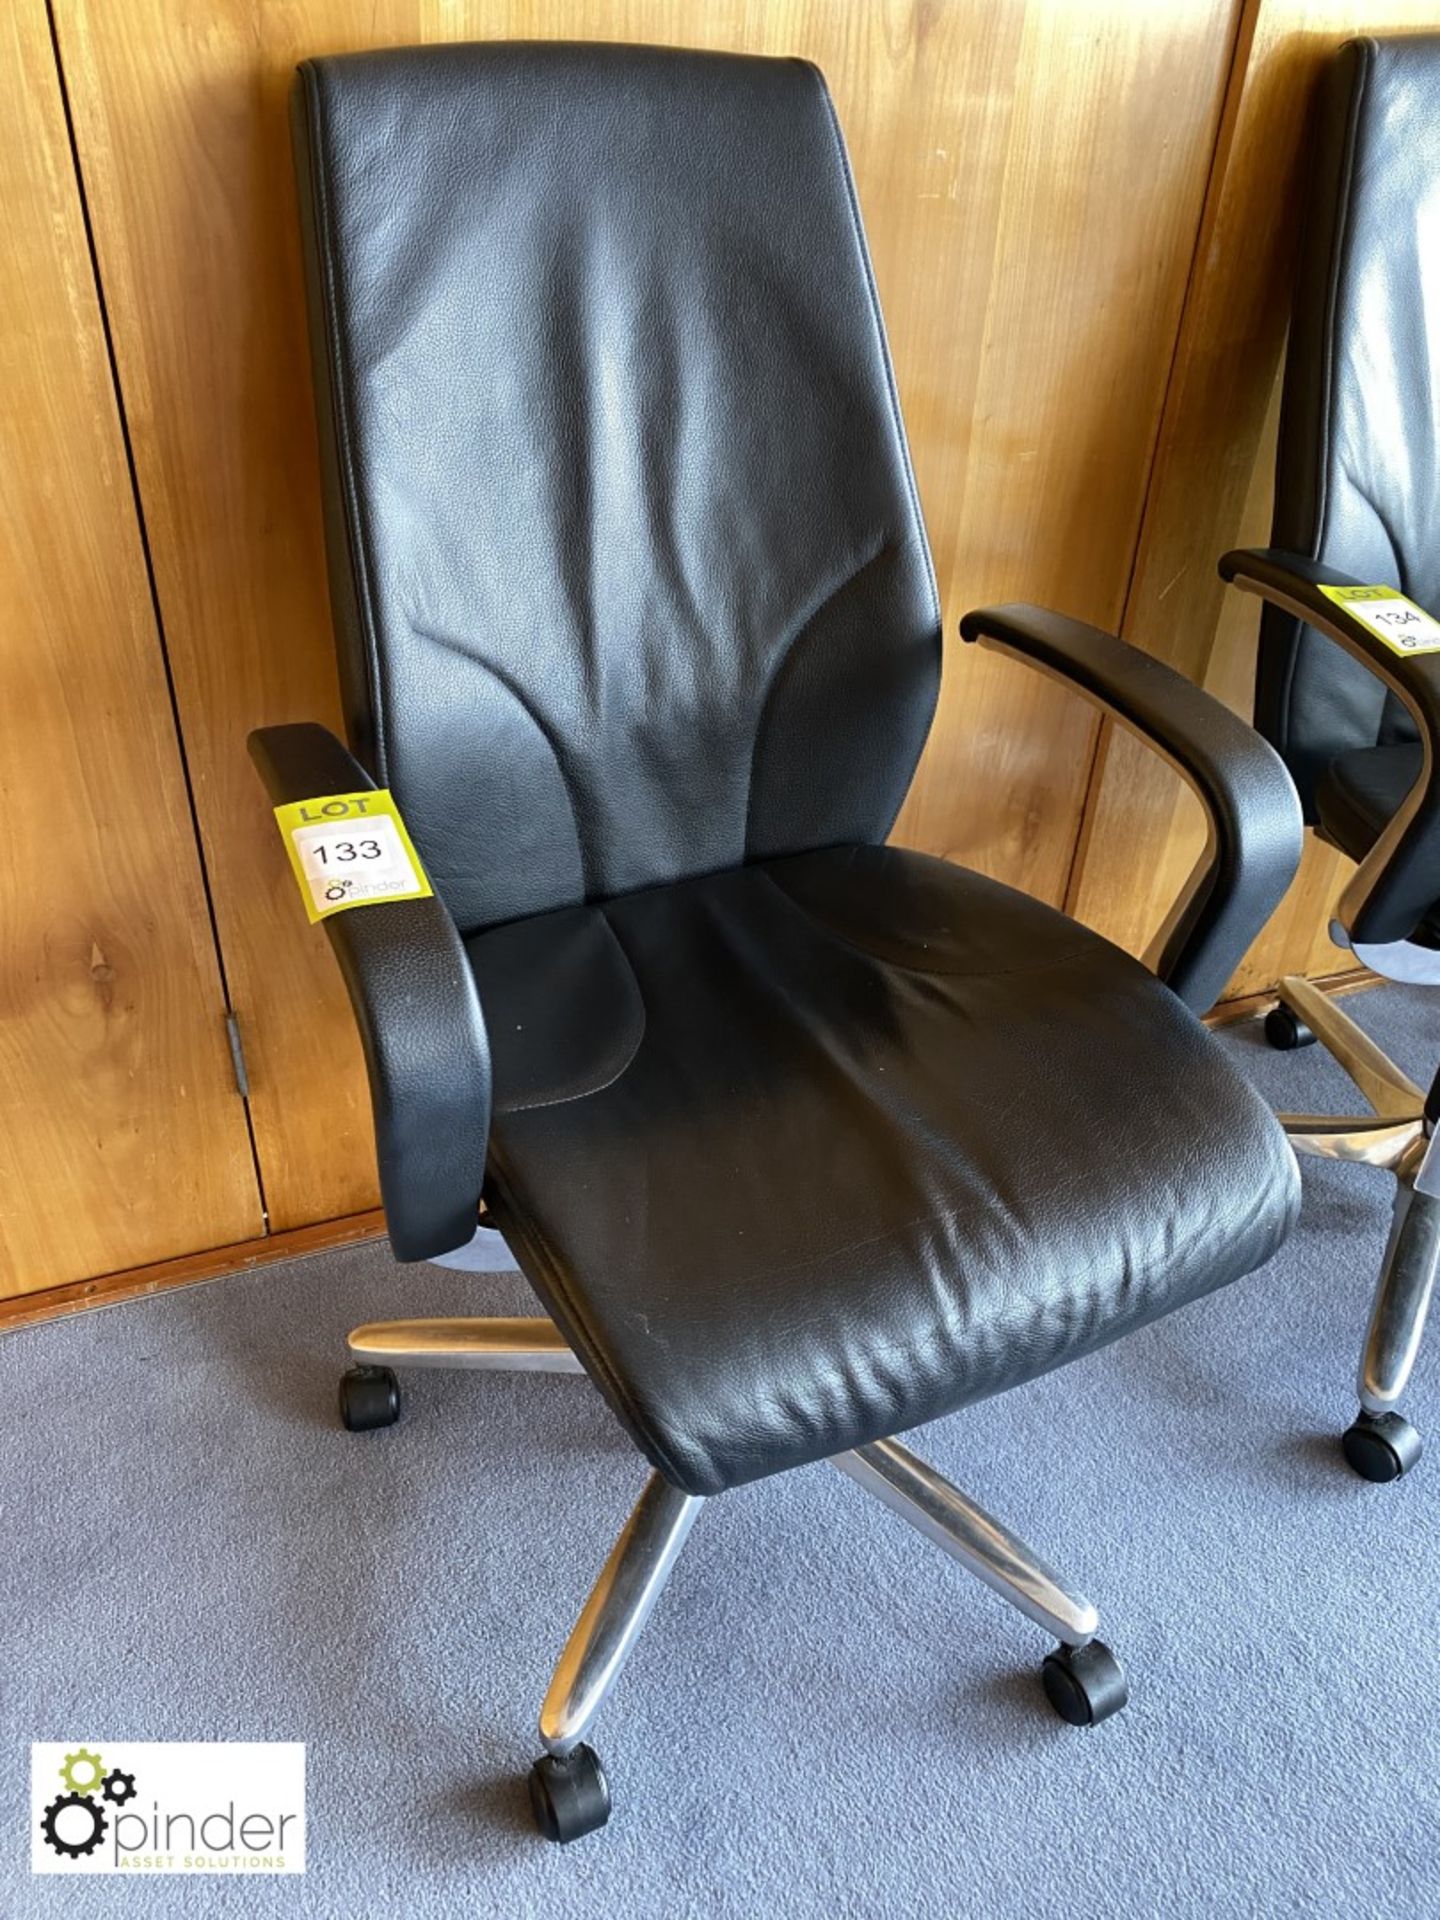 Orangebox Giroflex 64 leather upholstered swivel office Armchair (located in Boardroom Suite on 24th